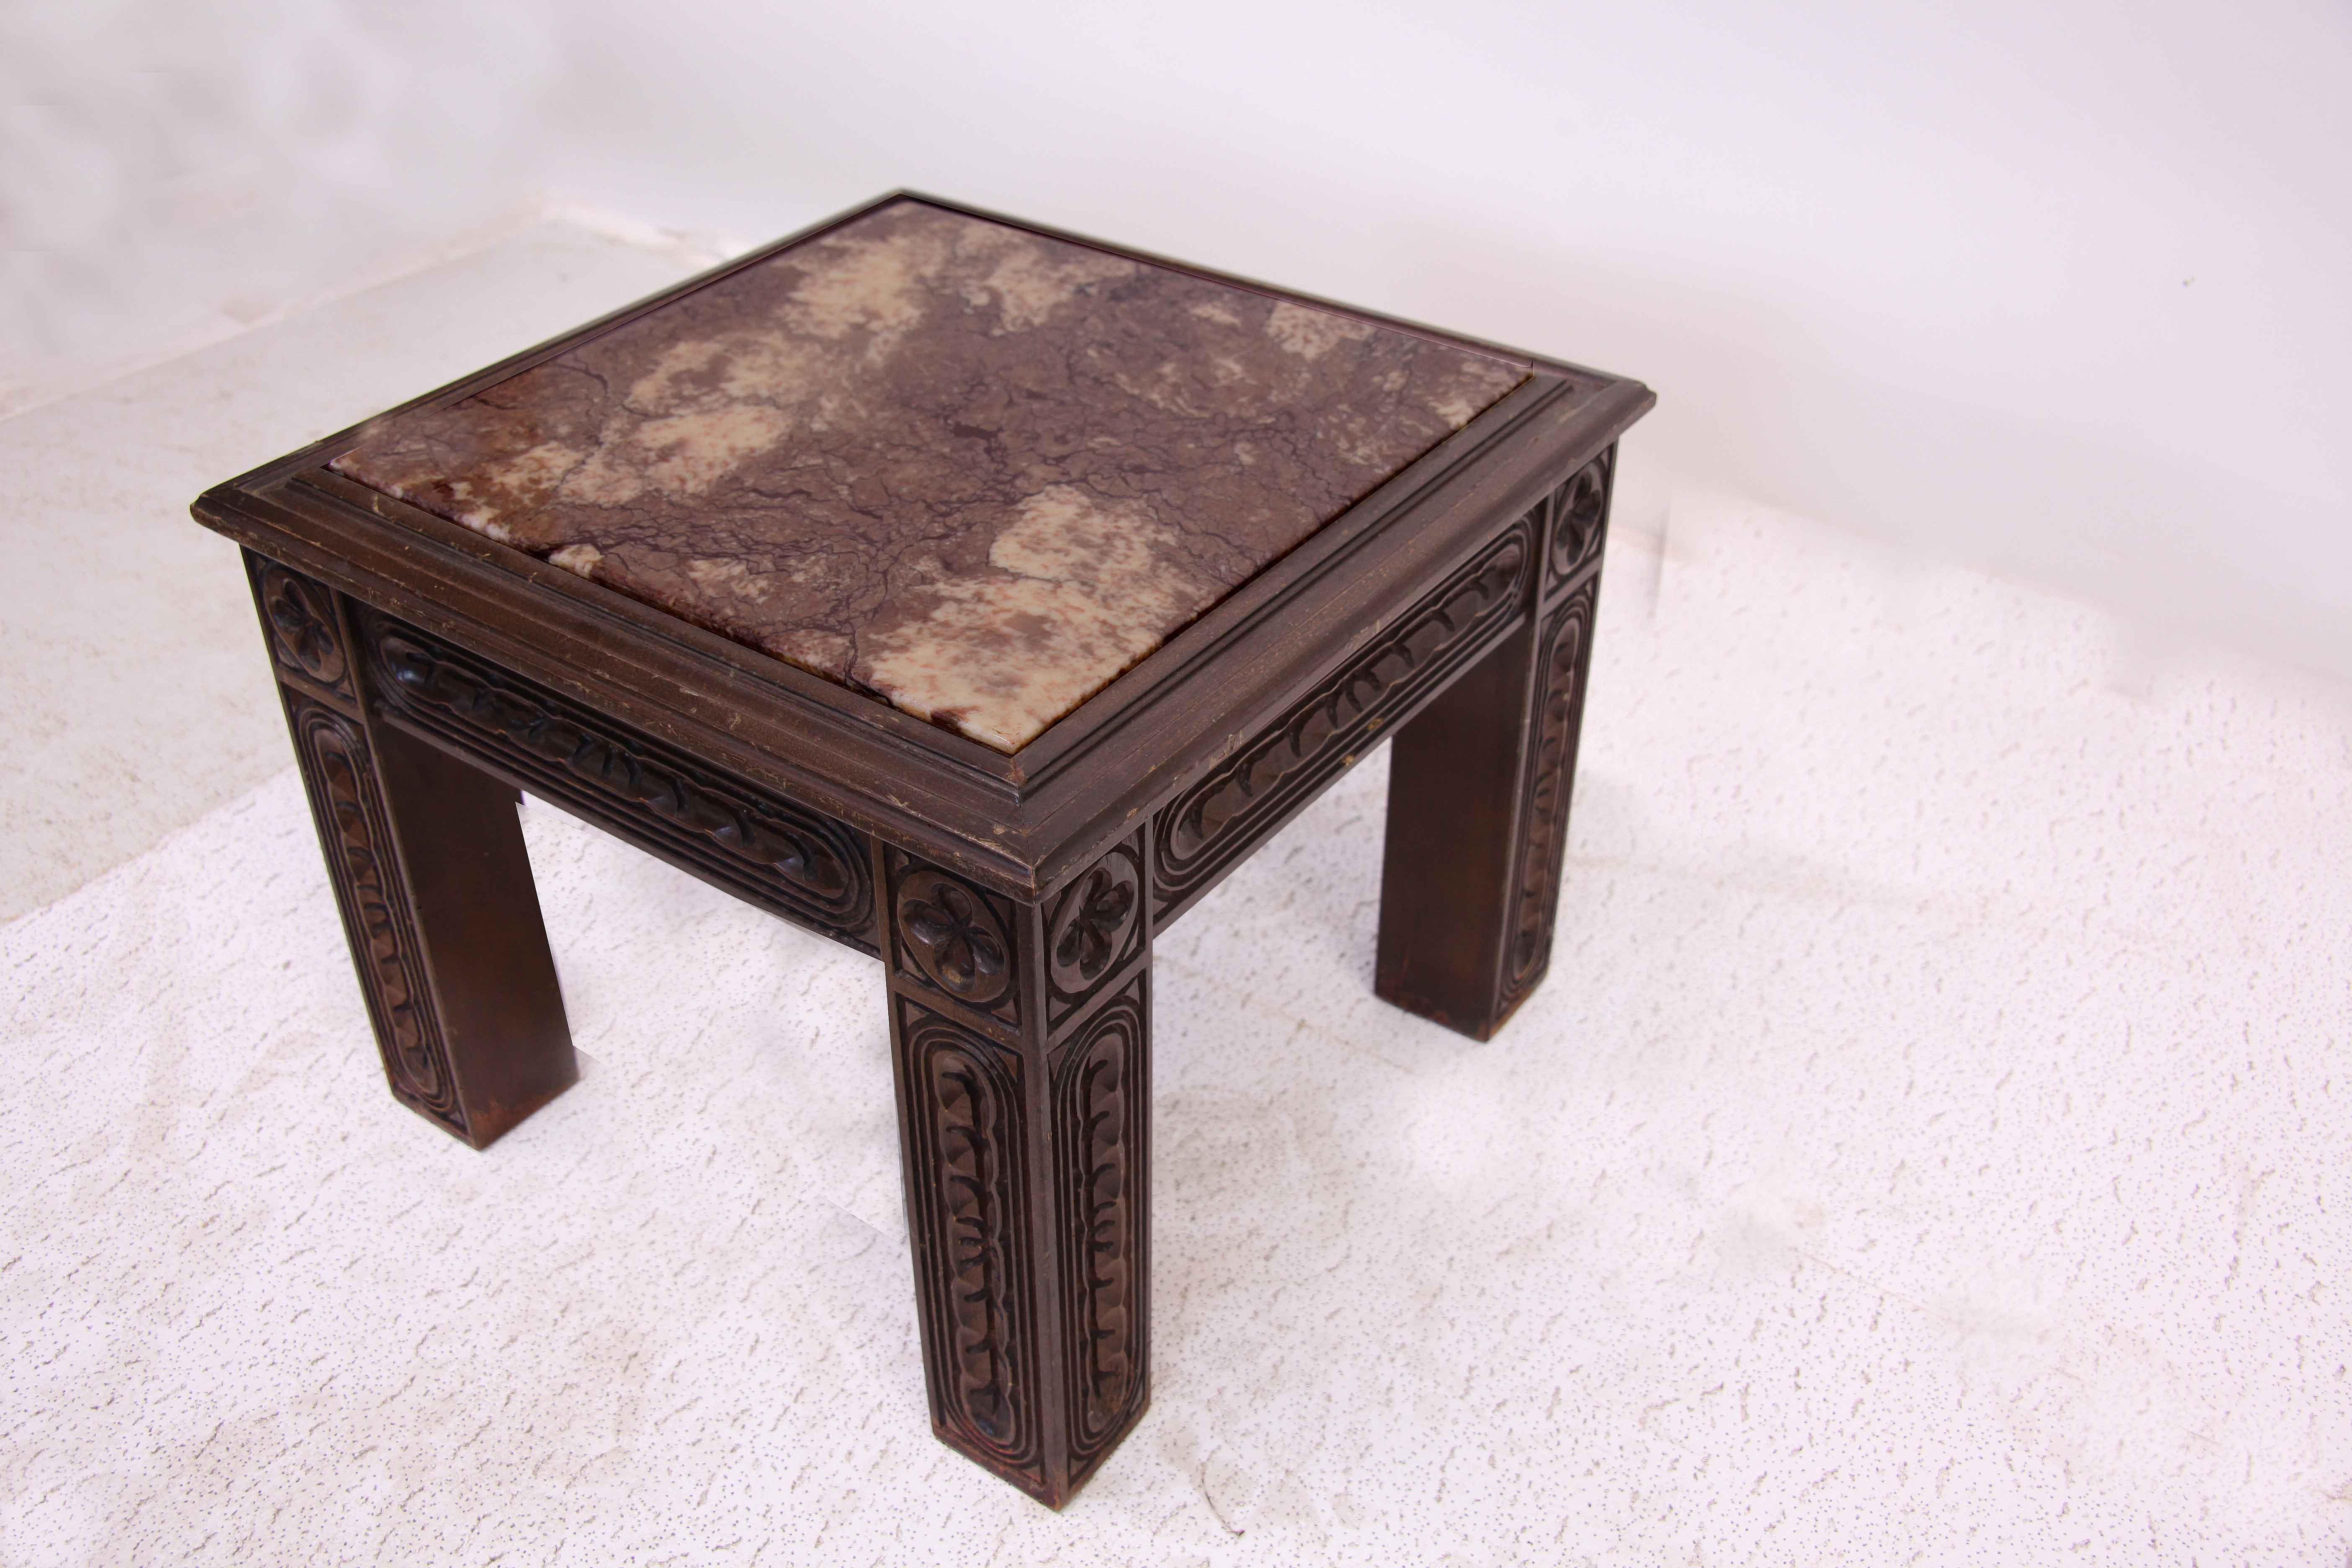 Marble top carved table, with beautiful veined marble top. The straight legs and rails are highly carved on all four sides, with a stylized four leaf clover at the top of each leg.